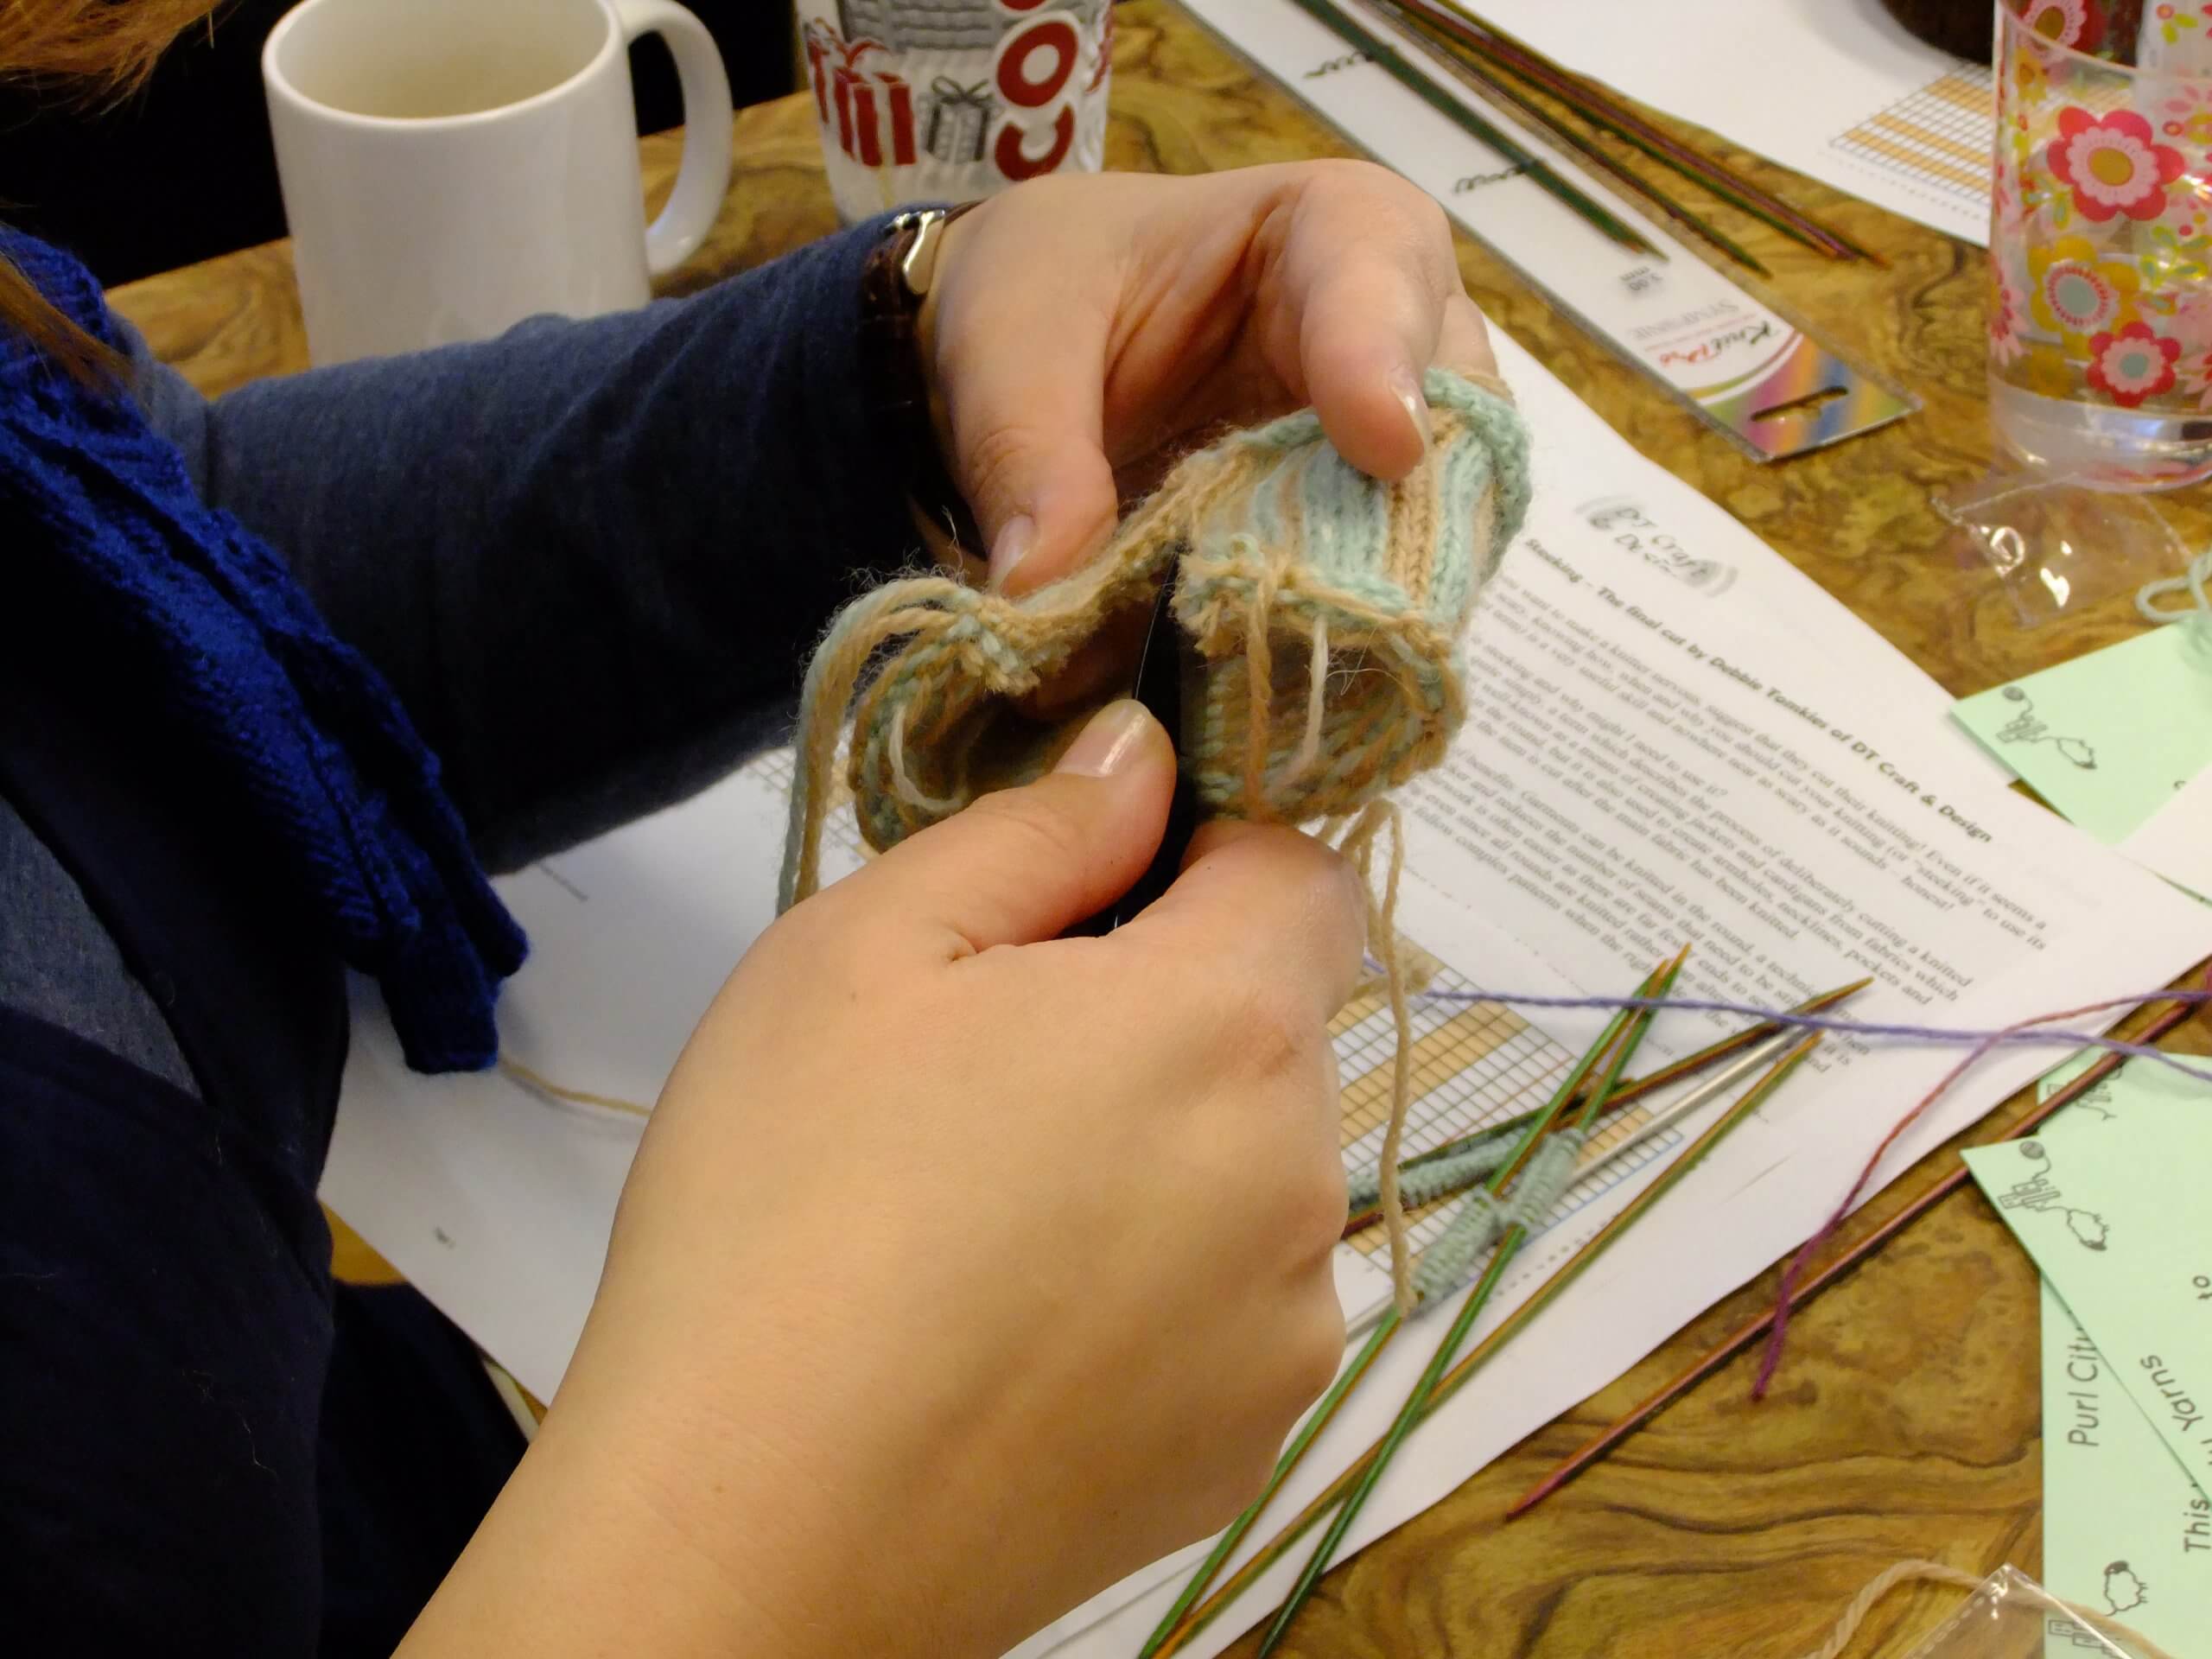 Student steeking (cutting) a sample on a workshop with Debbie Tomkies of DT Craft & Design